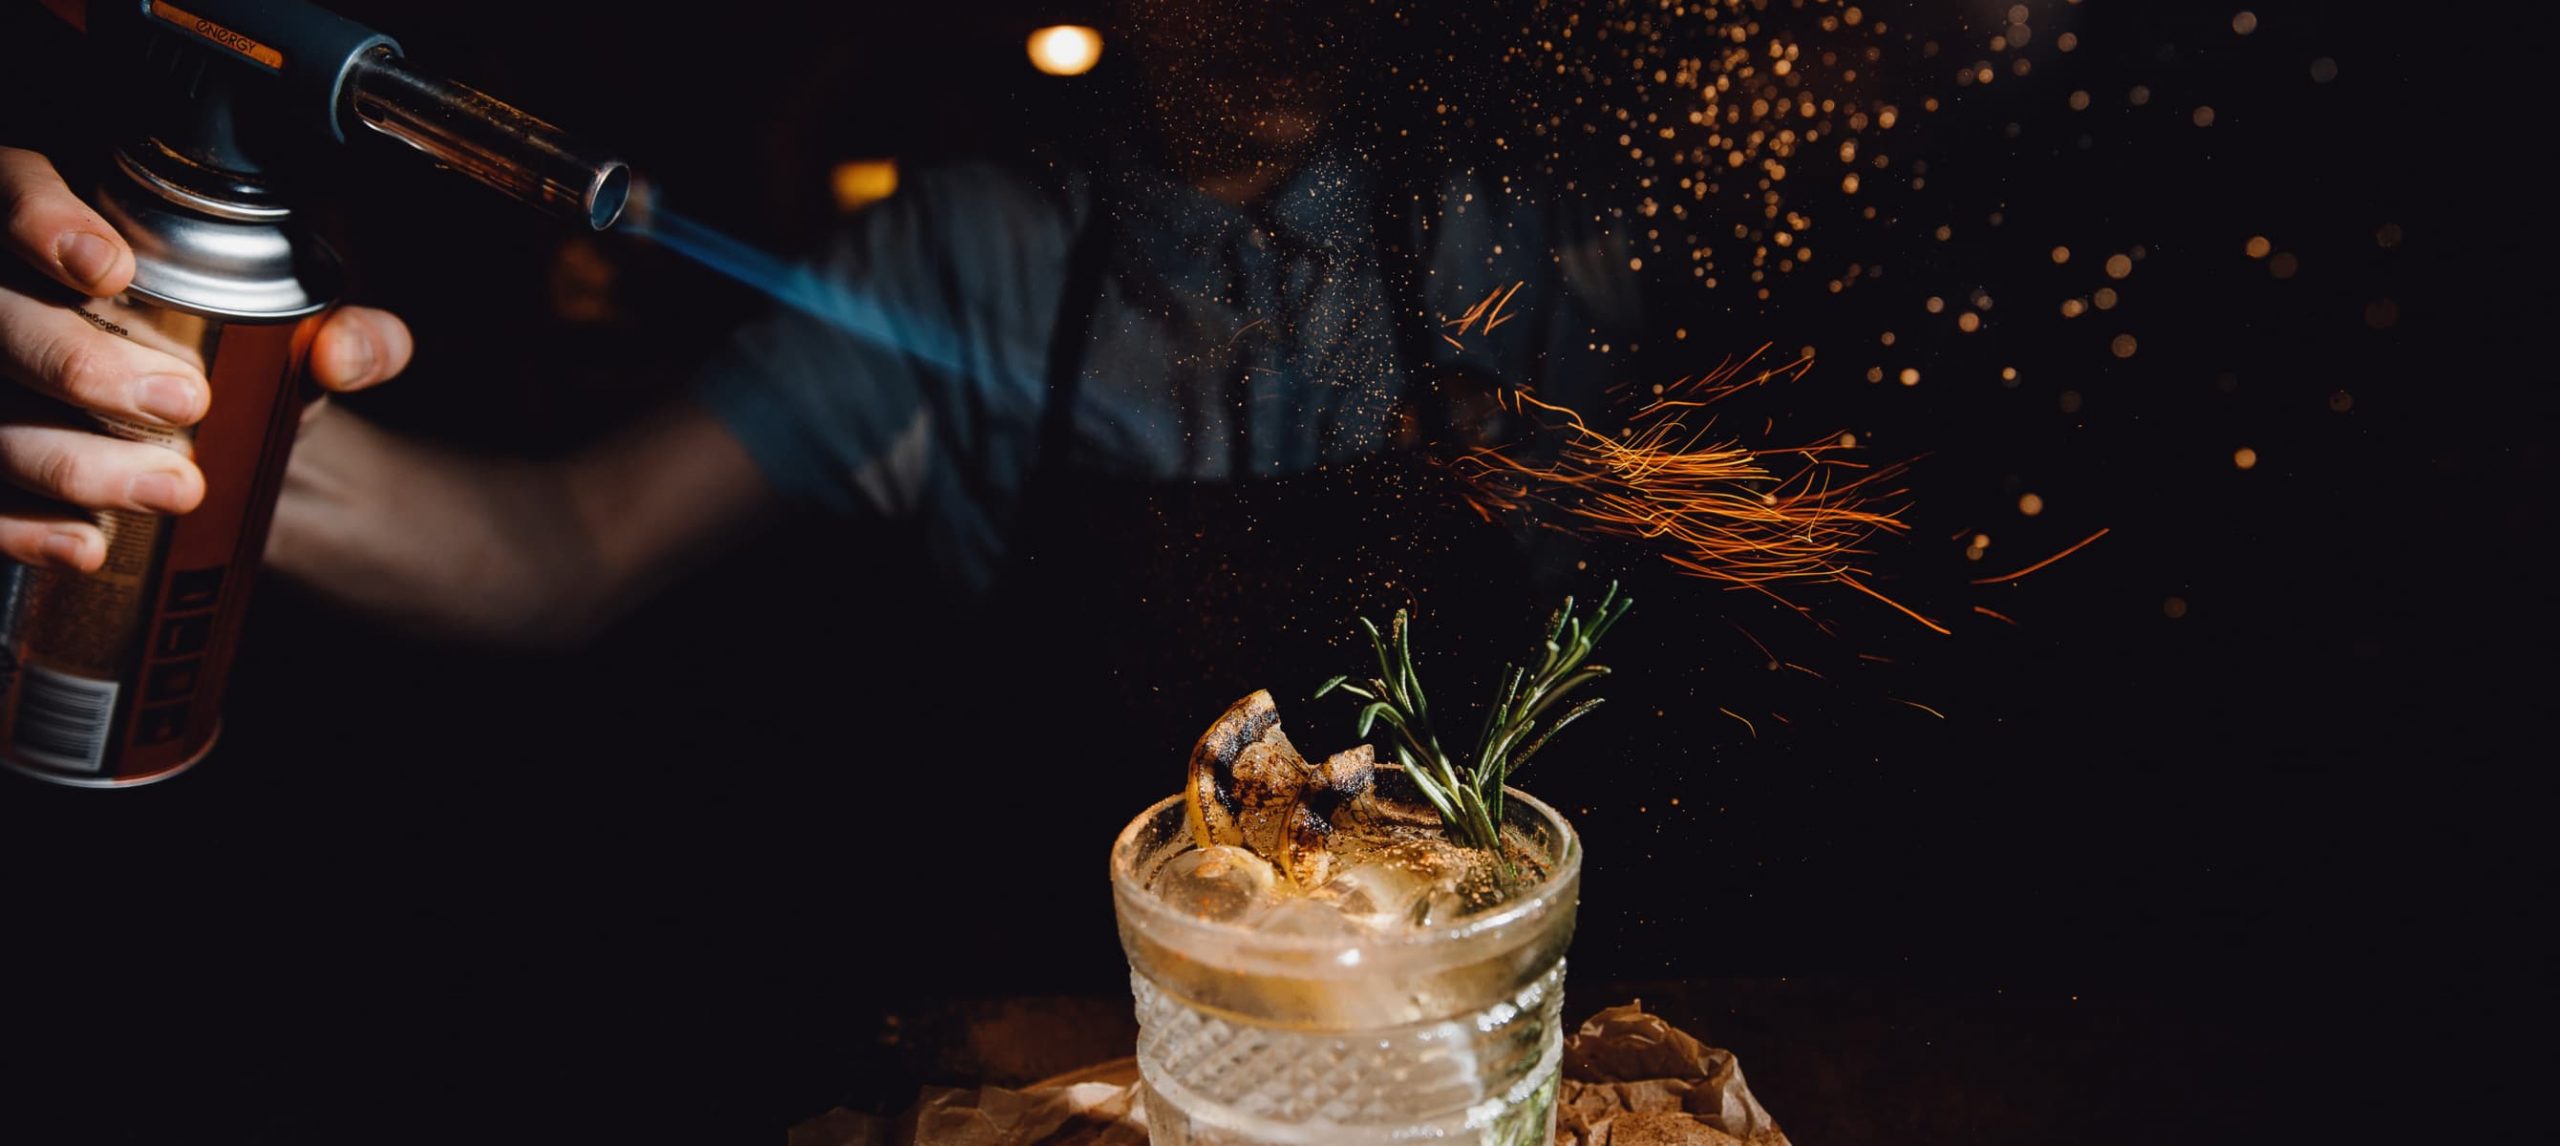 A male mixologist flaming up a cocktail drink in a dark bar